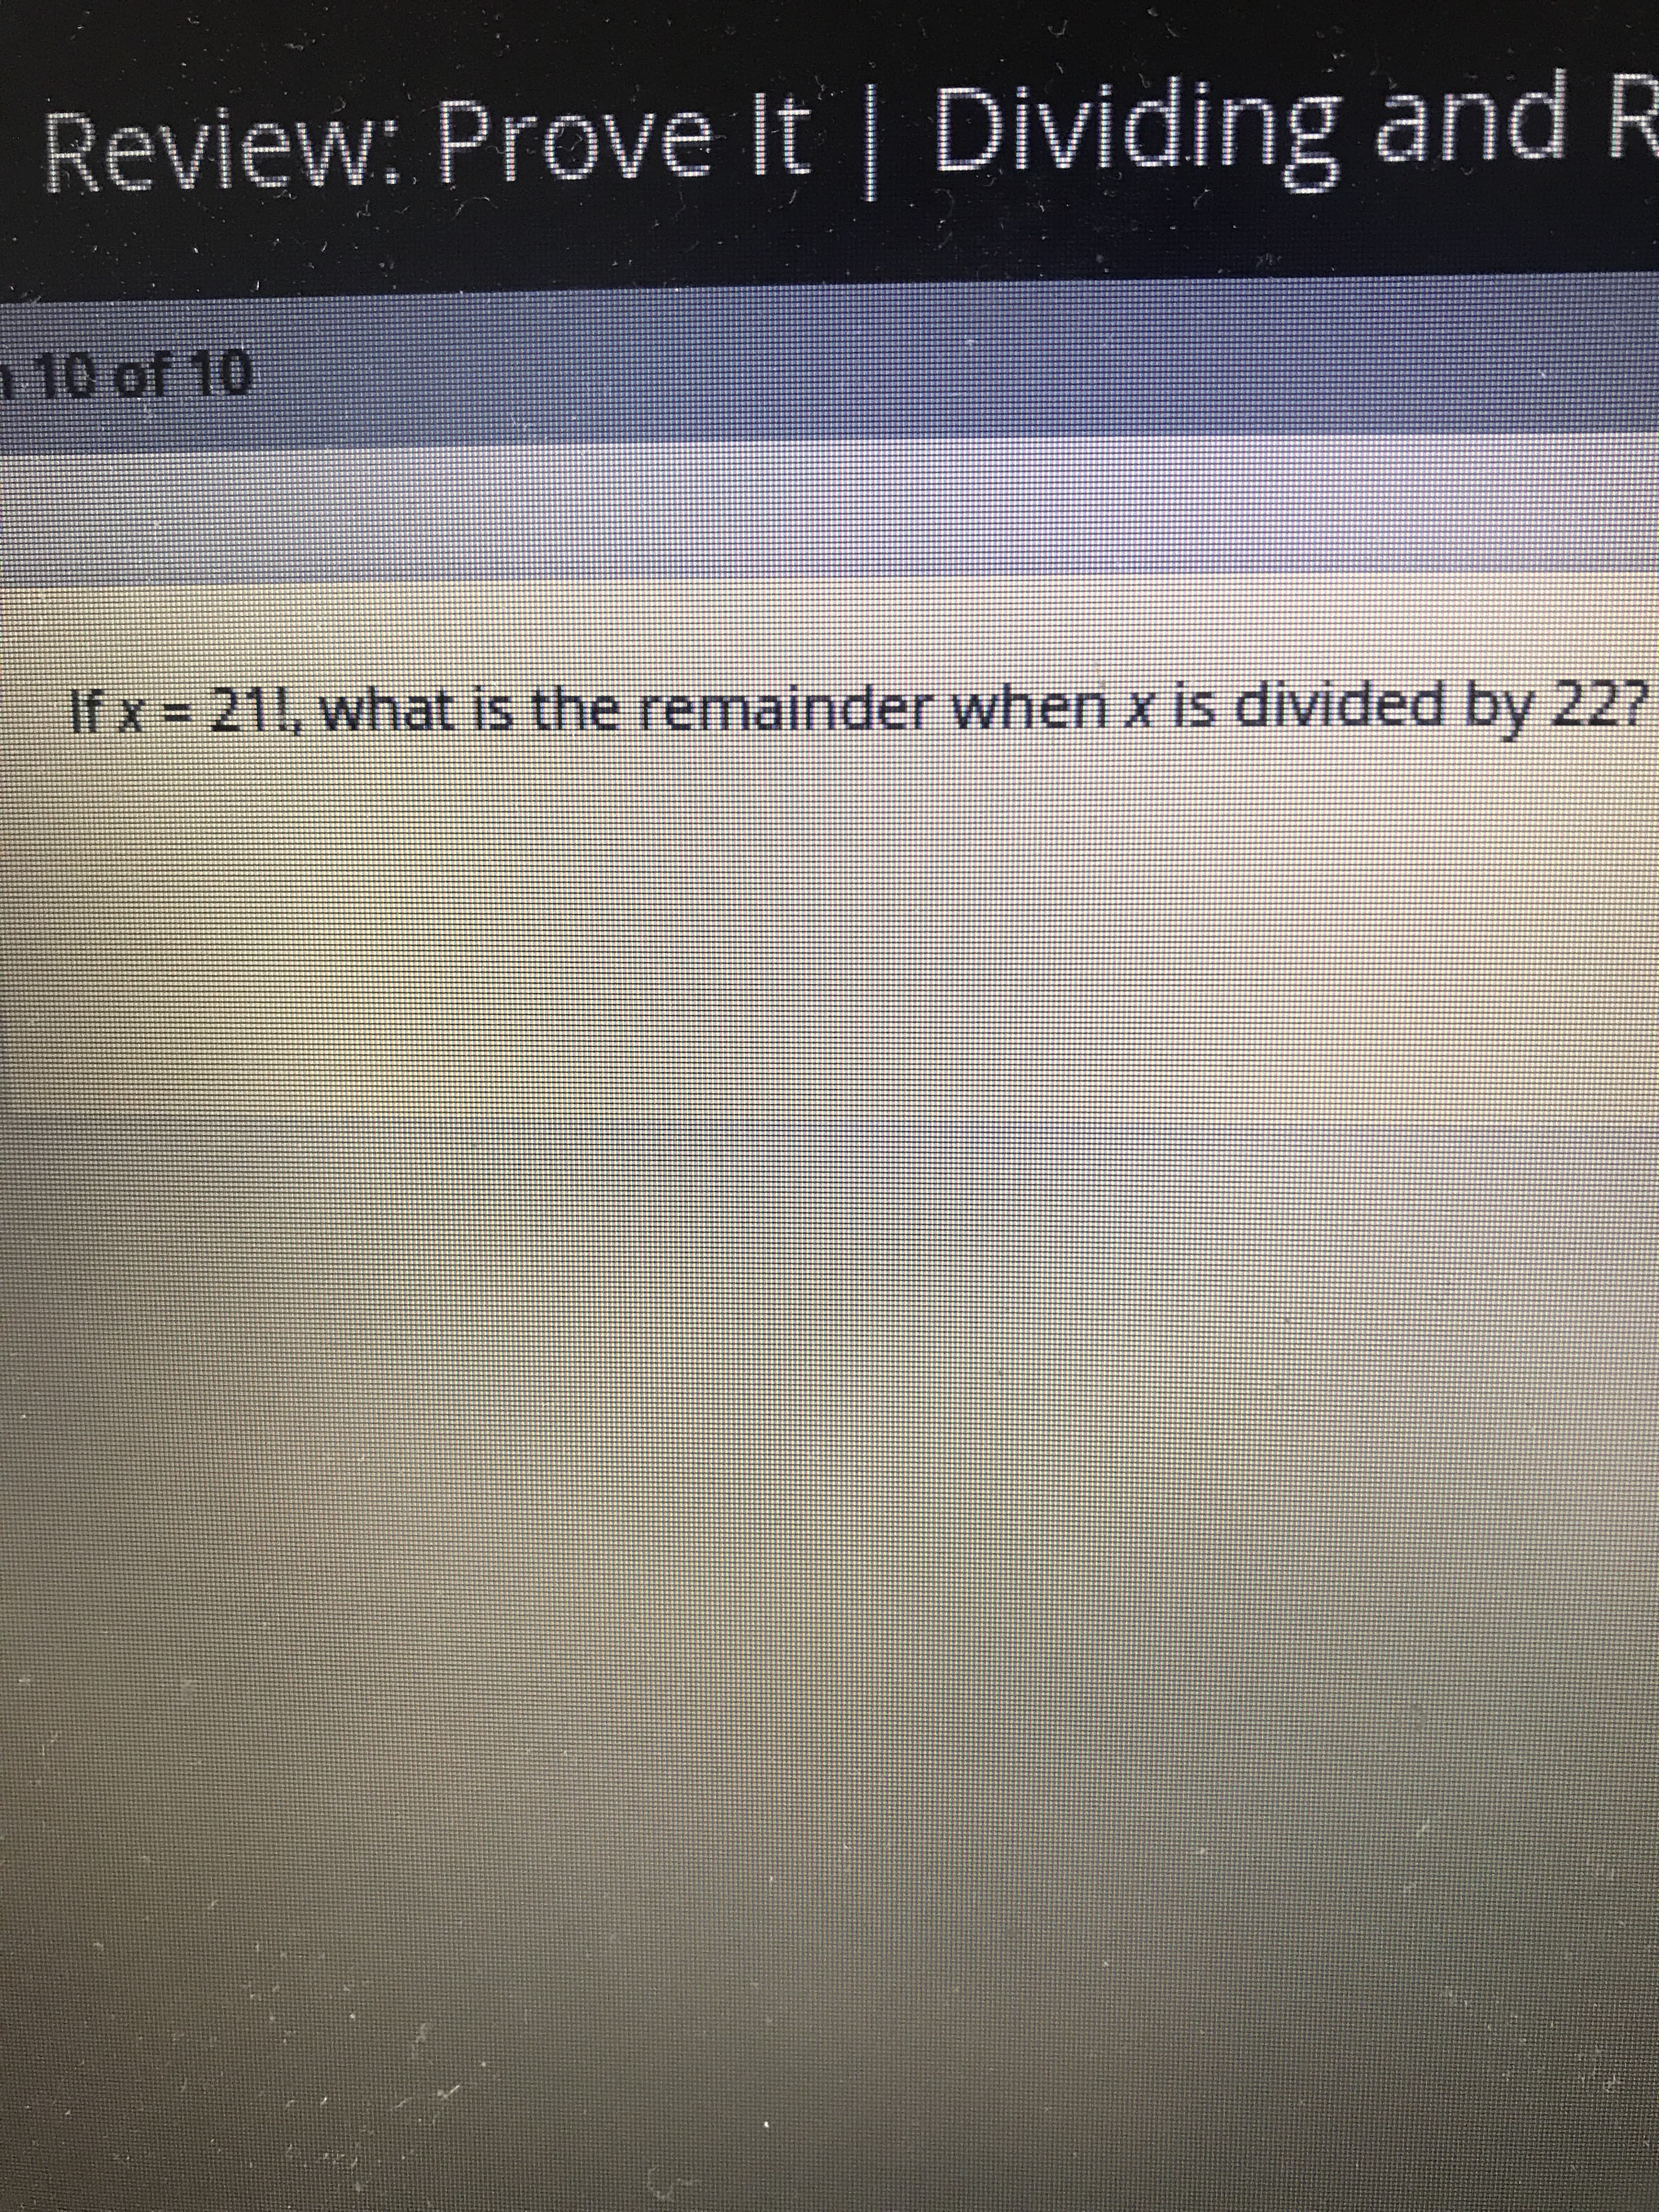 Ifx= 211, what is the remainder whenx is divided by 227
